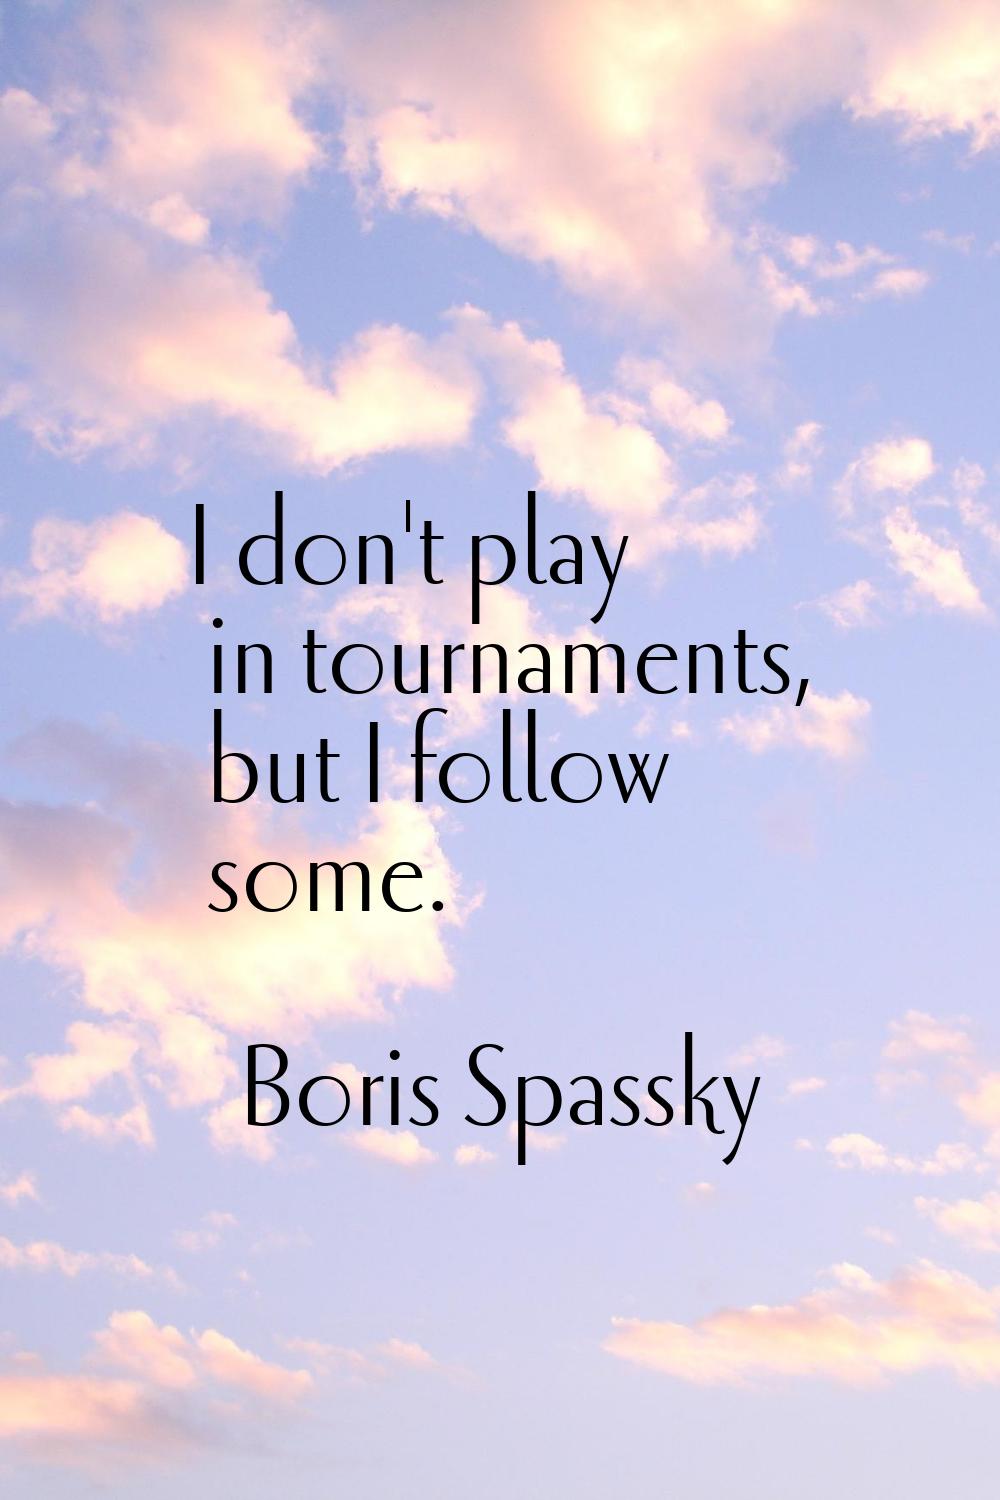 I don't play in tournaments, but I follow some.